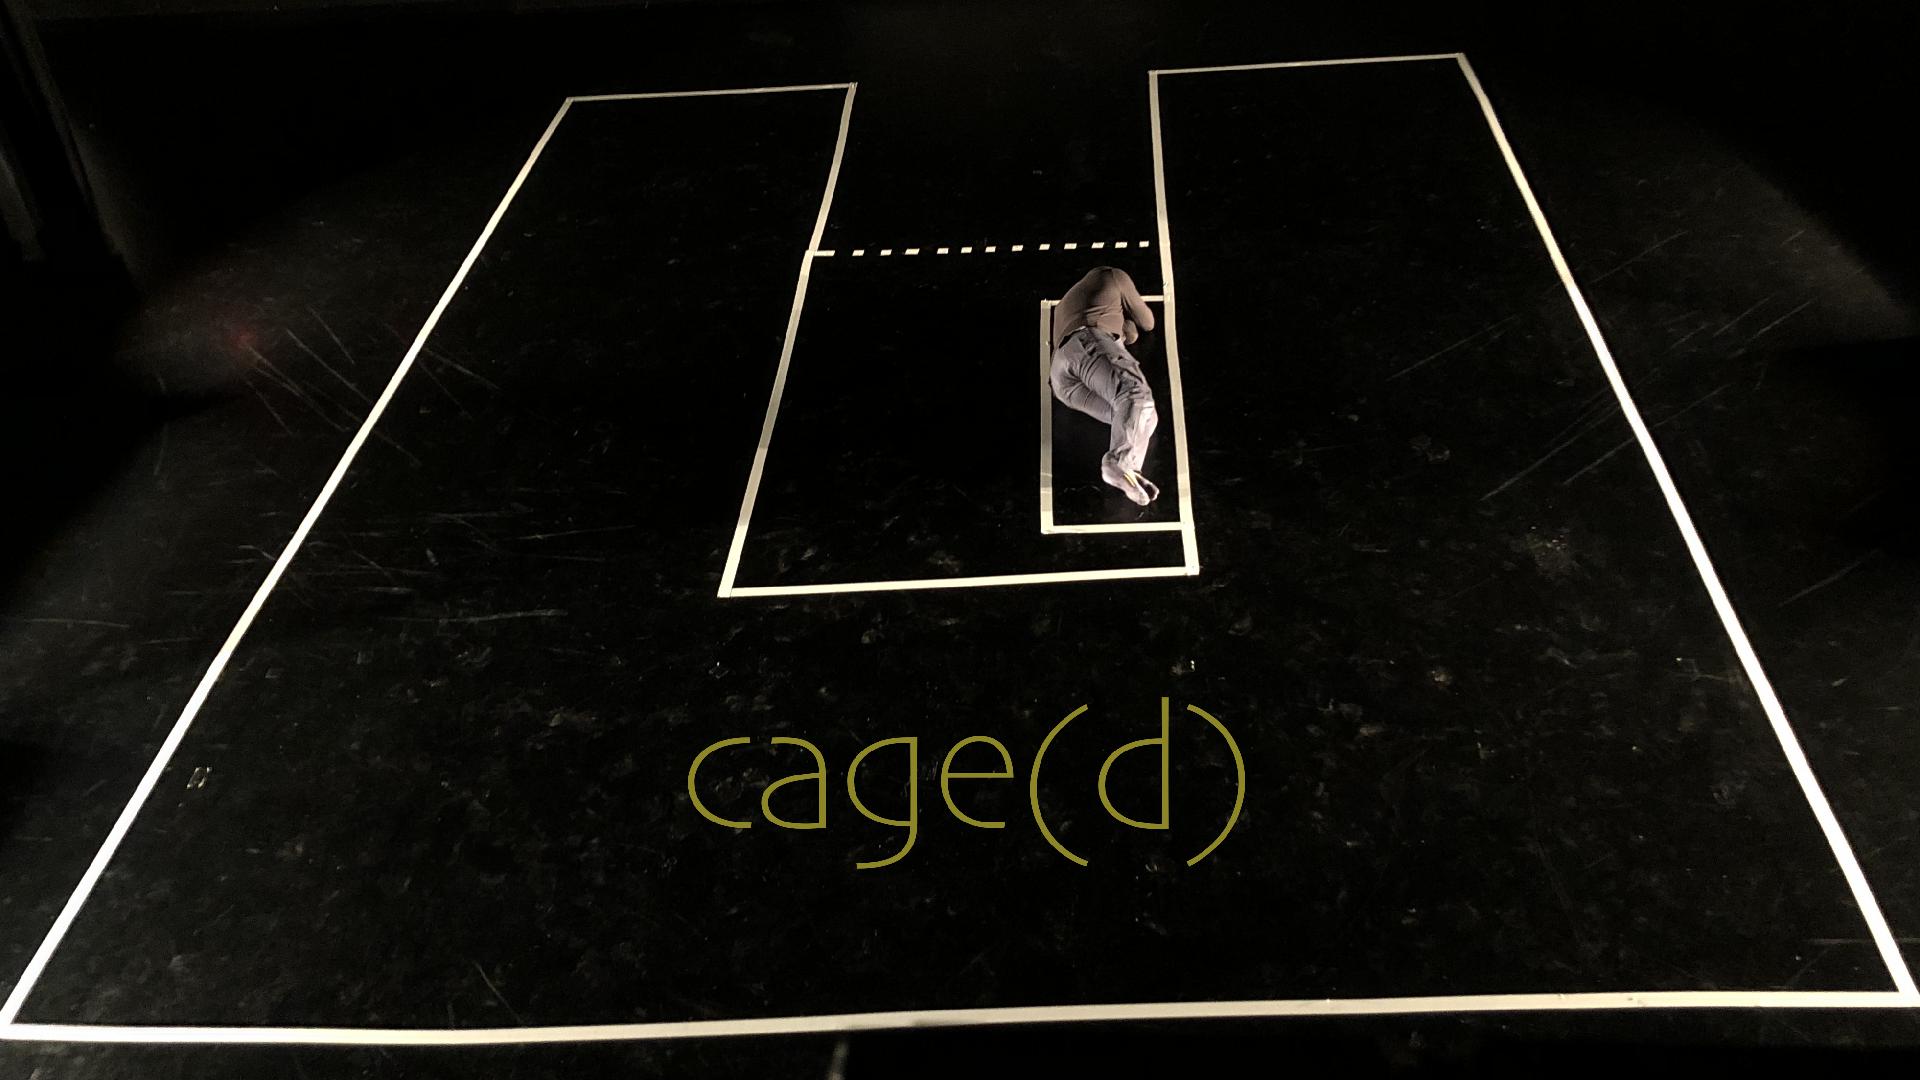 cage(d)